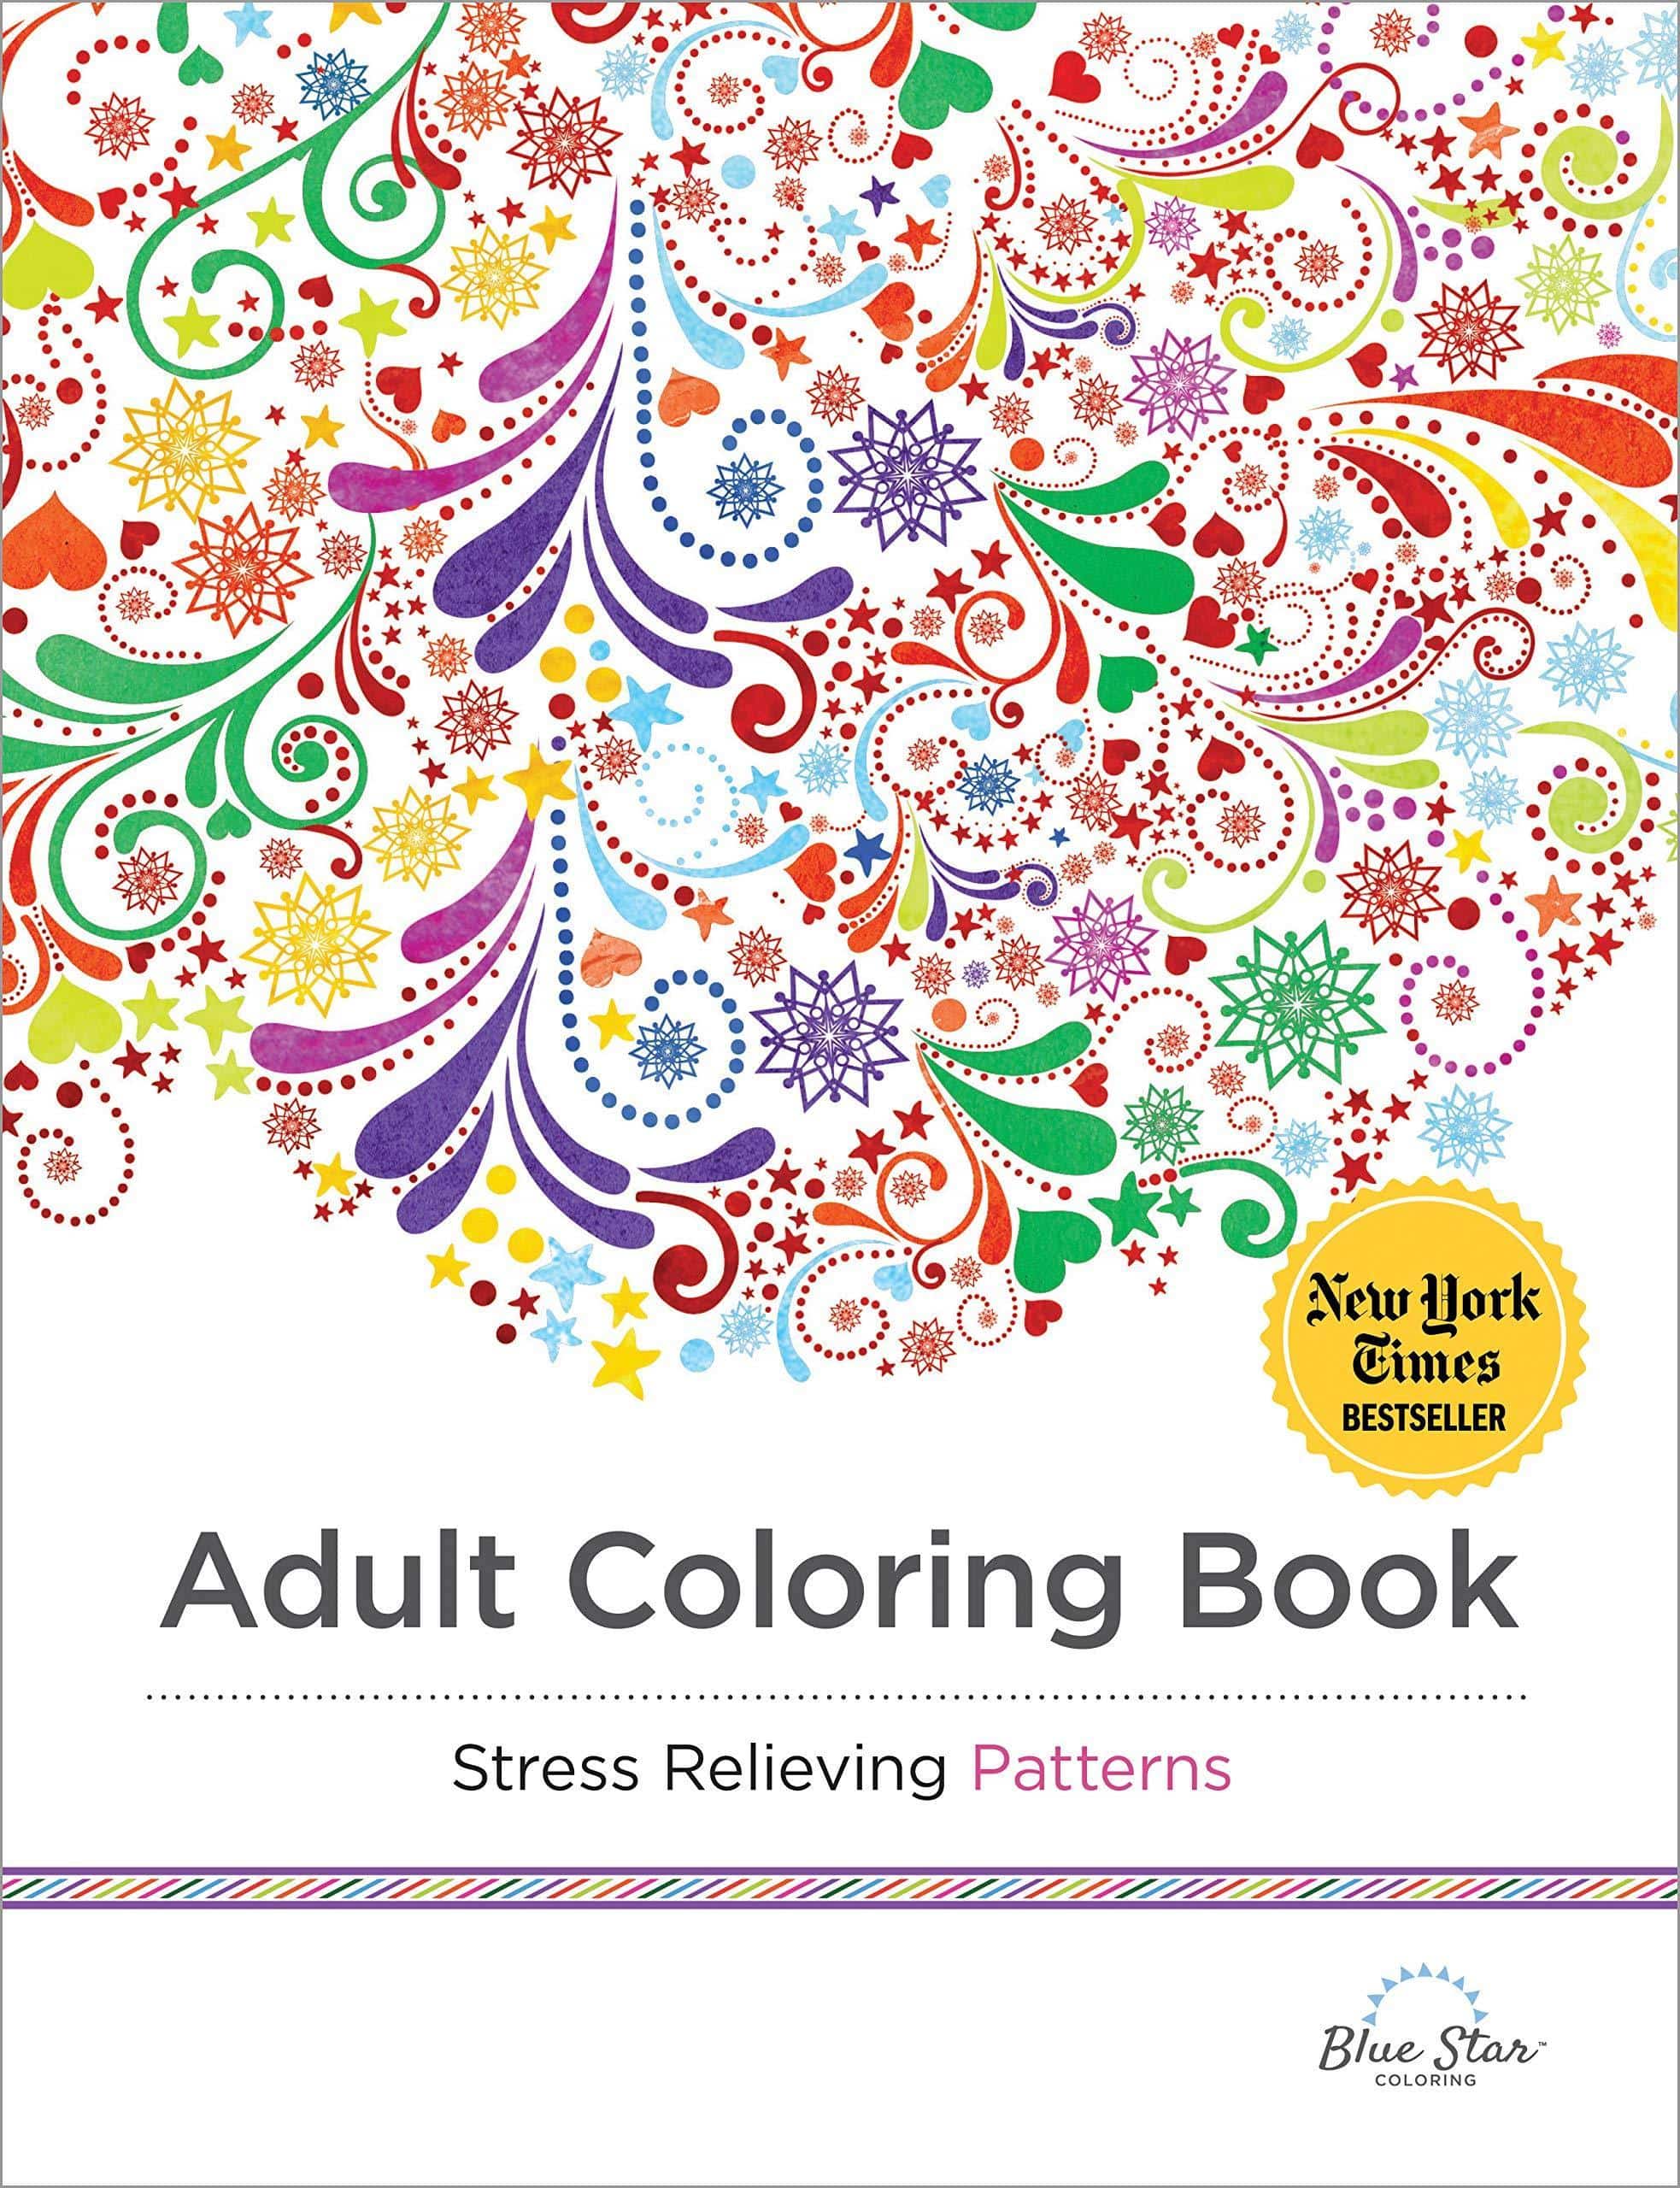 Adult Coloring Book Stress Relieving Patterns - SureShot Books Publishing LLC